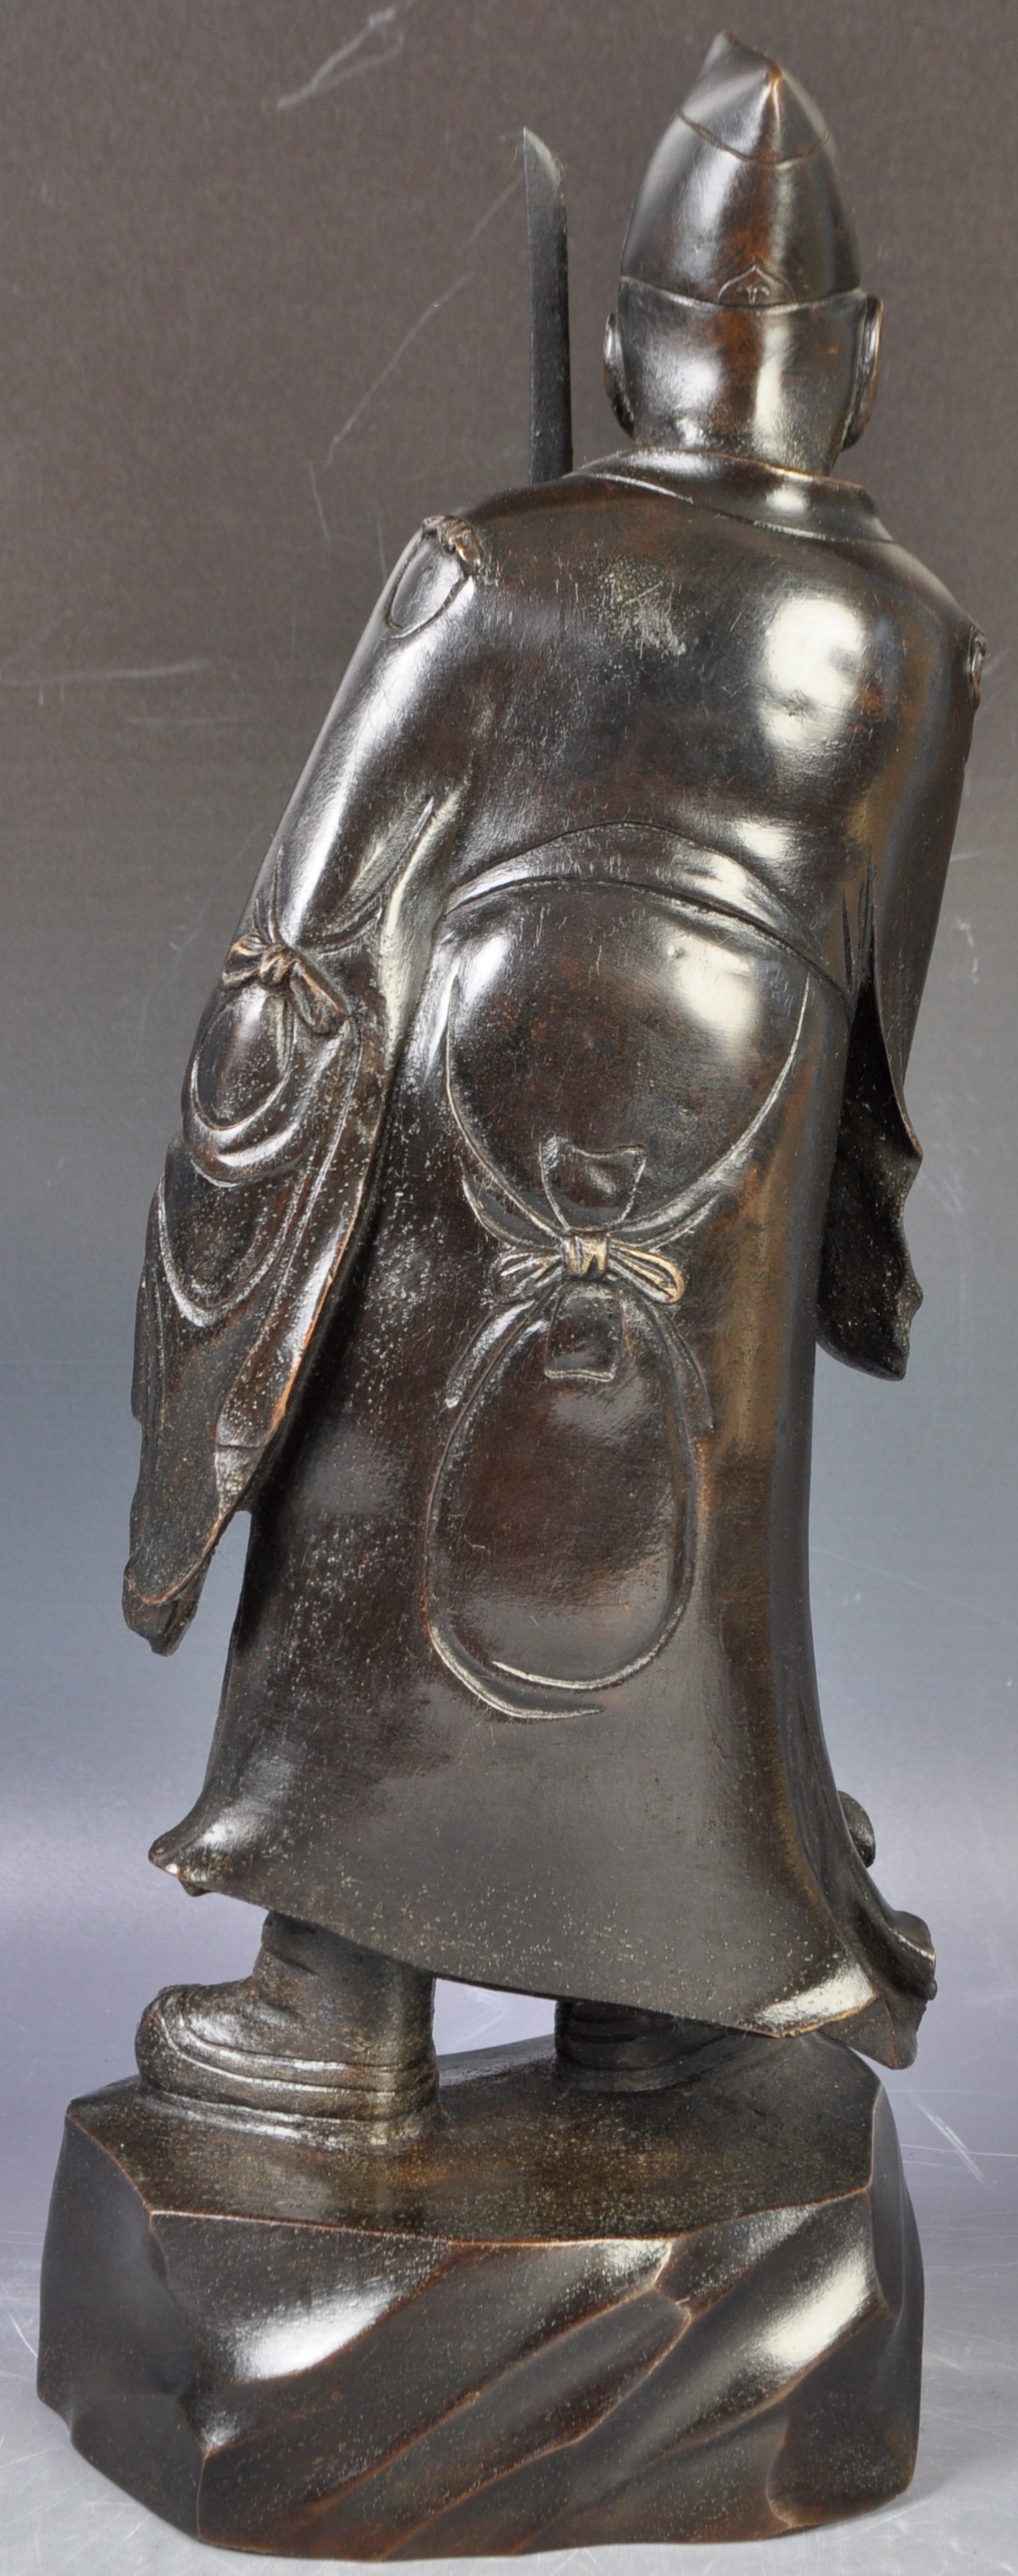 19TH CENTURY JAPANESE BRONZE FIGURE OF A KABUKI THEATRE ACTOR - Image 8 of 9